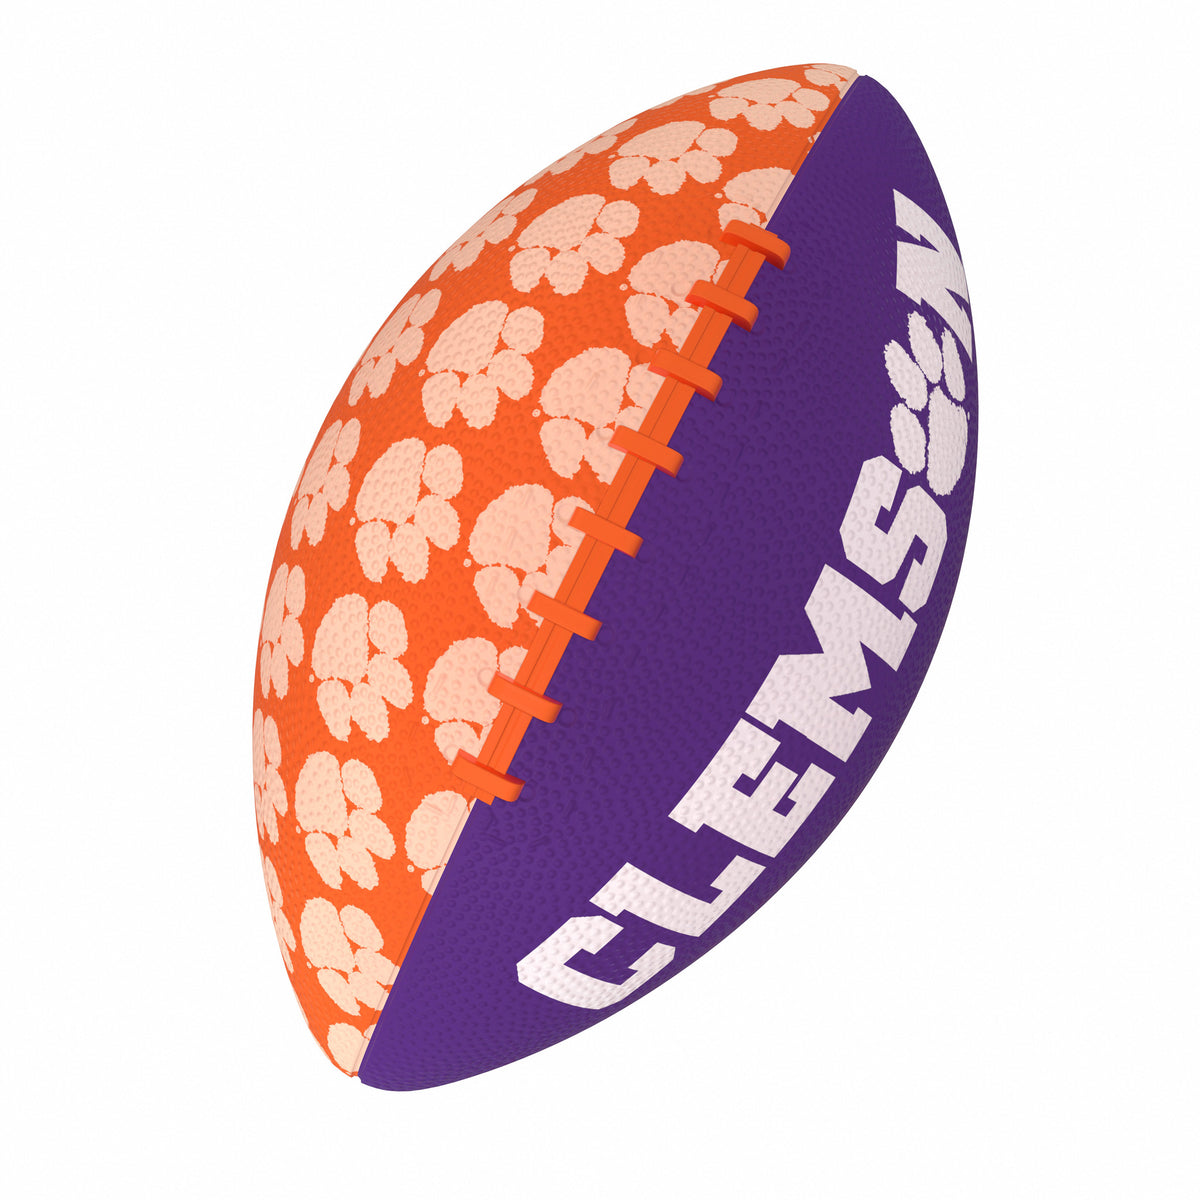 Clemson Repeating Mini-Size Rubber Football